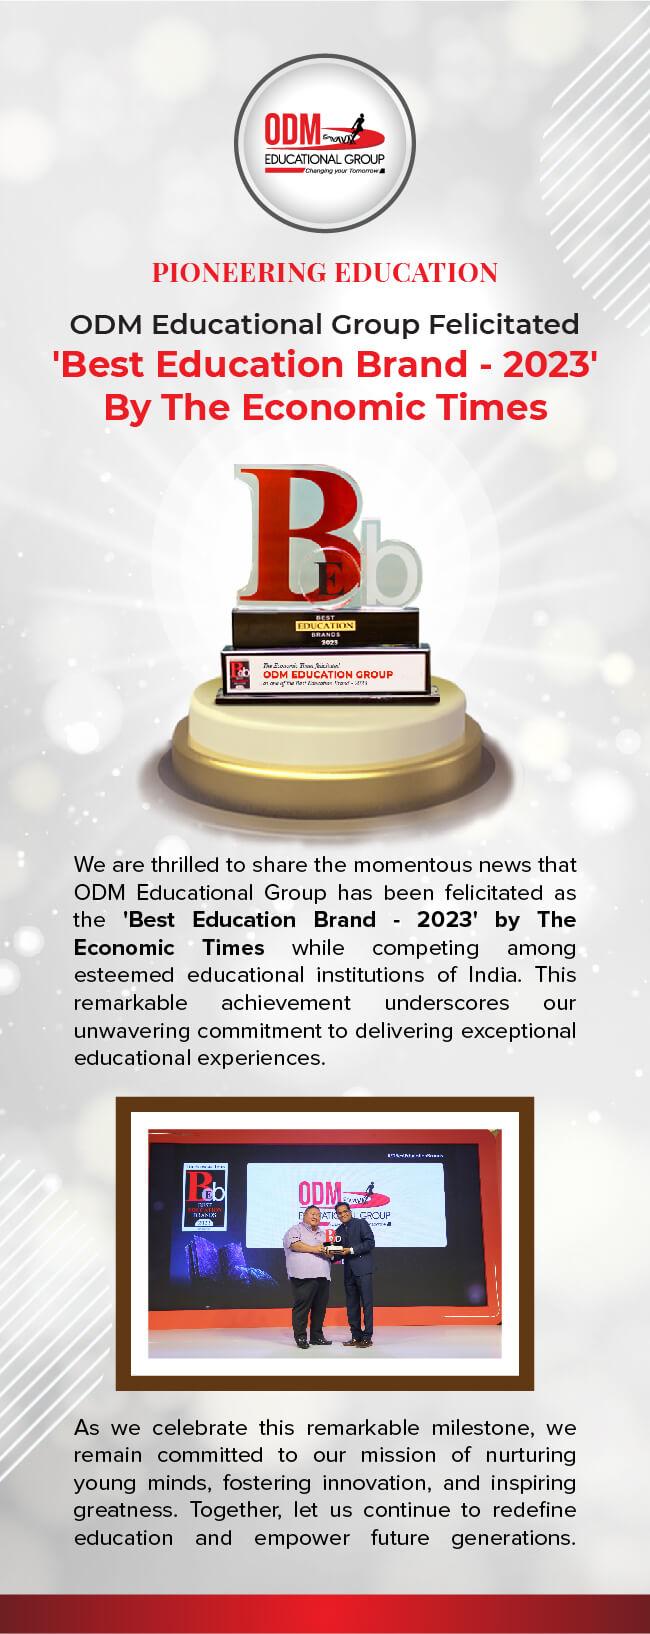 ODM Educational Group Felicitated as 'Best Education Brand -